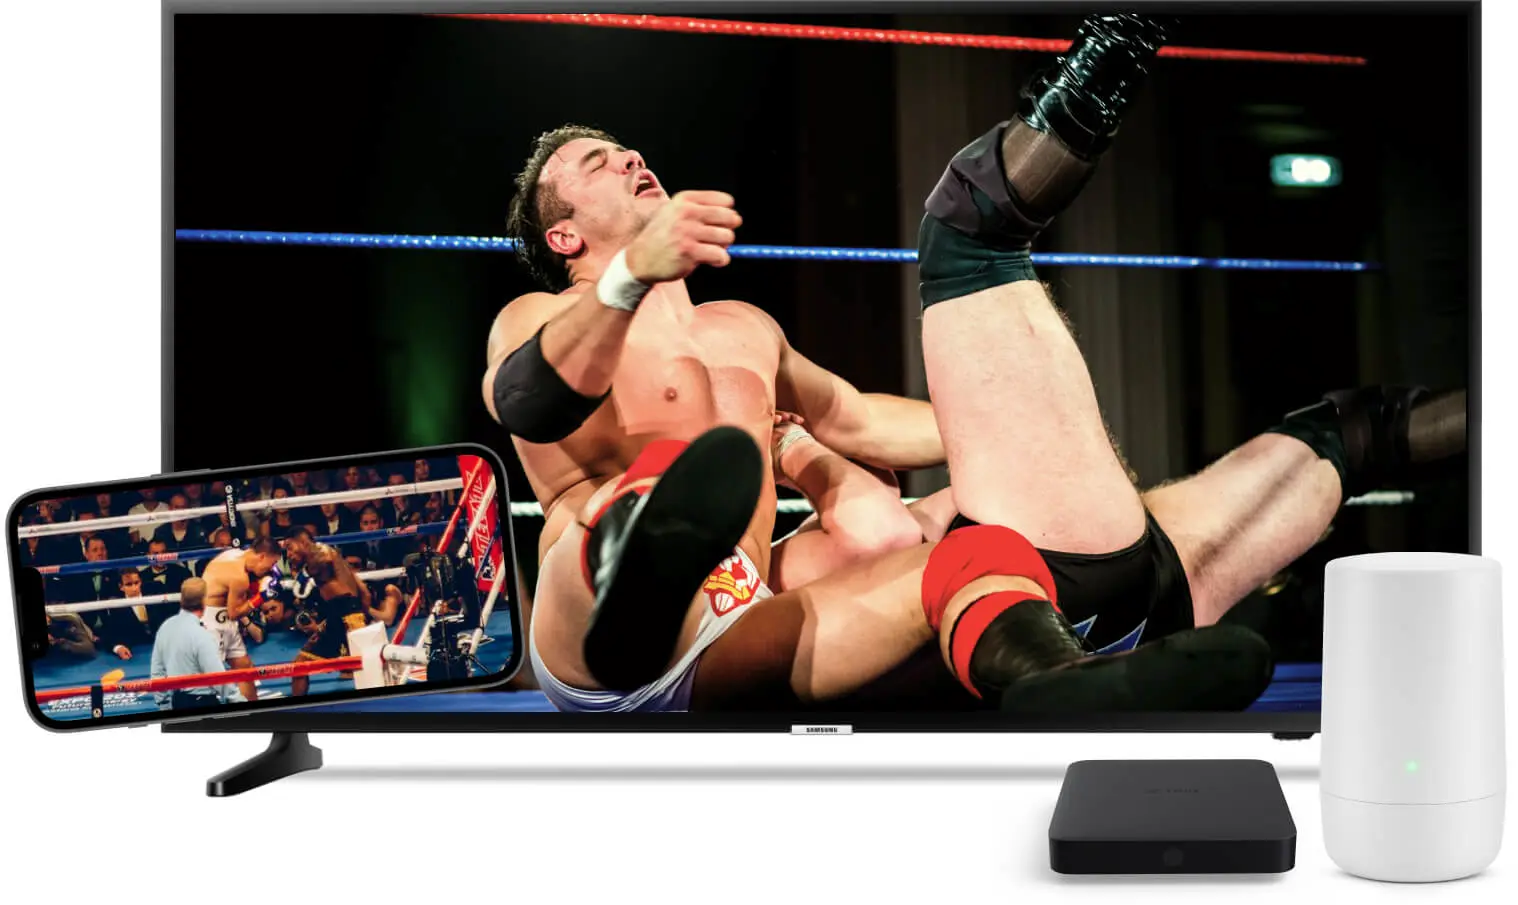 A TV digital box and Wi-Fi device sit in front of a TV and smartphone displaying wrestling and boxing.